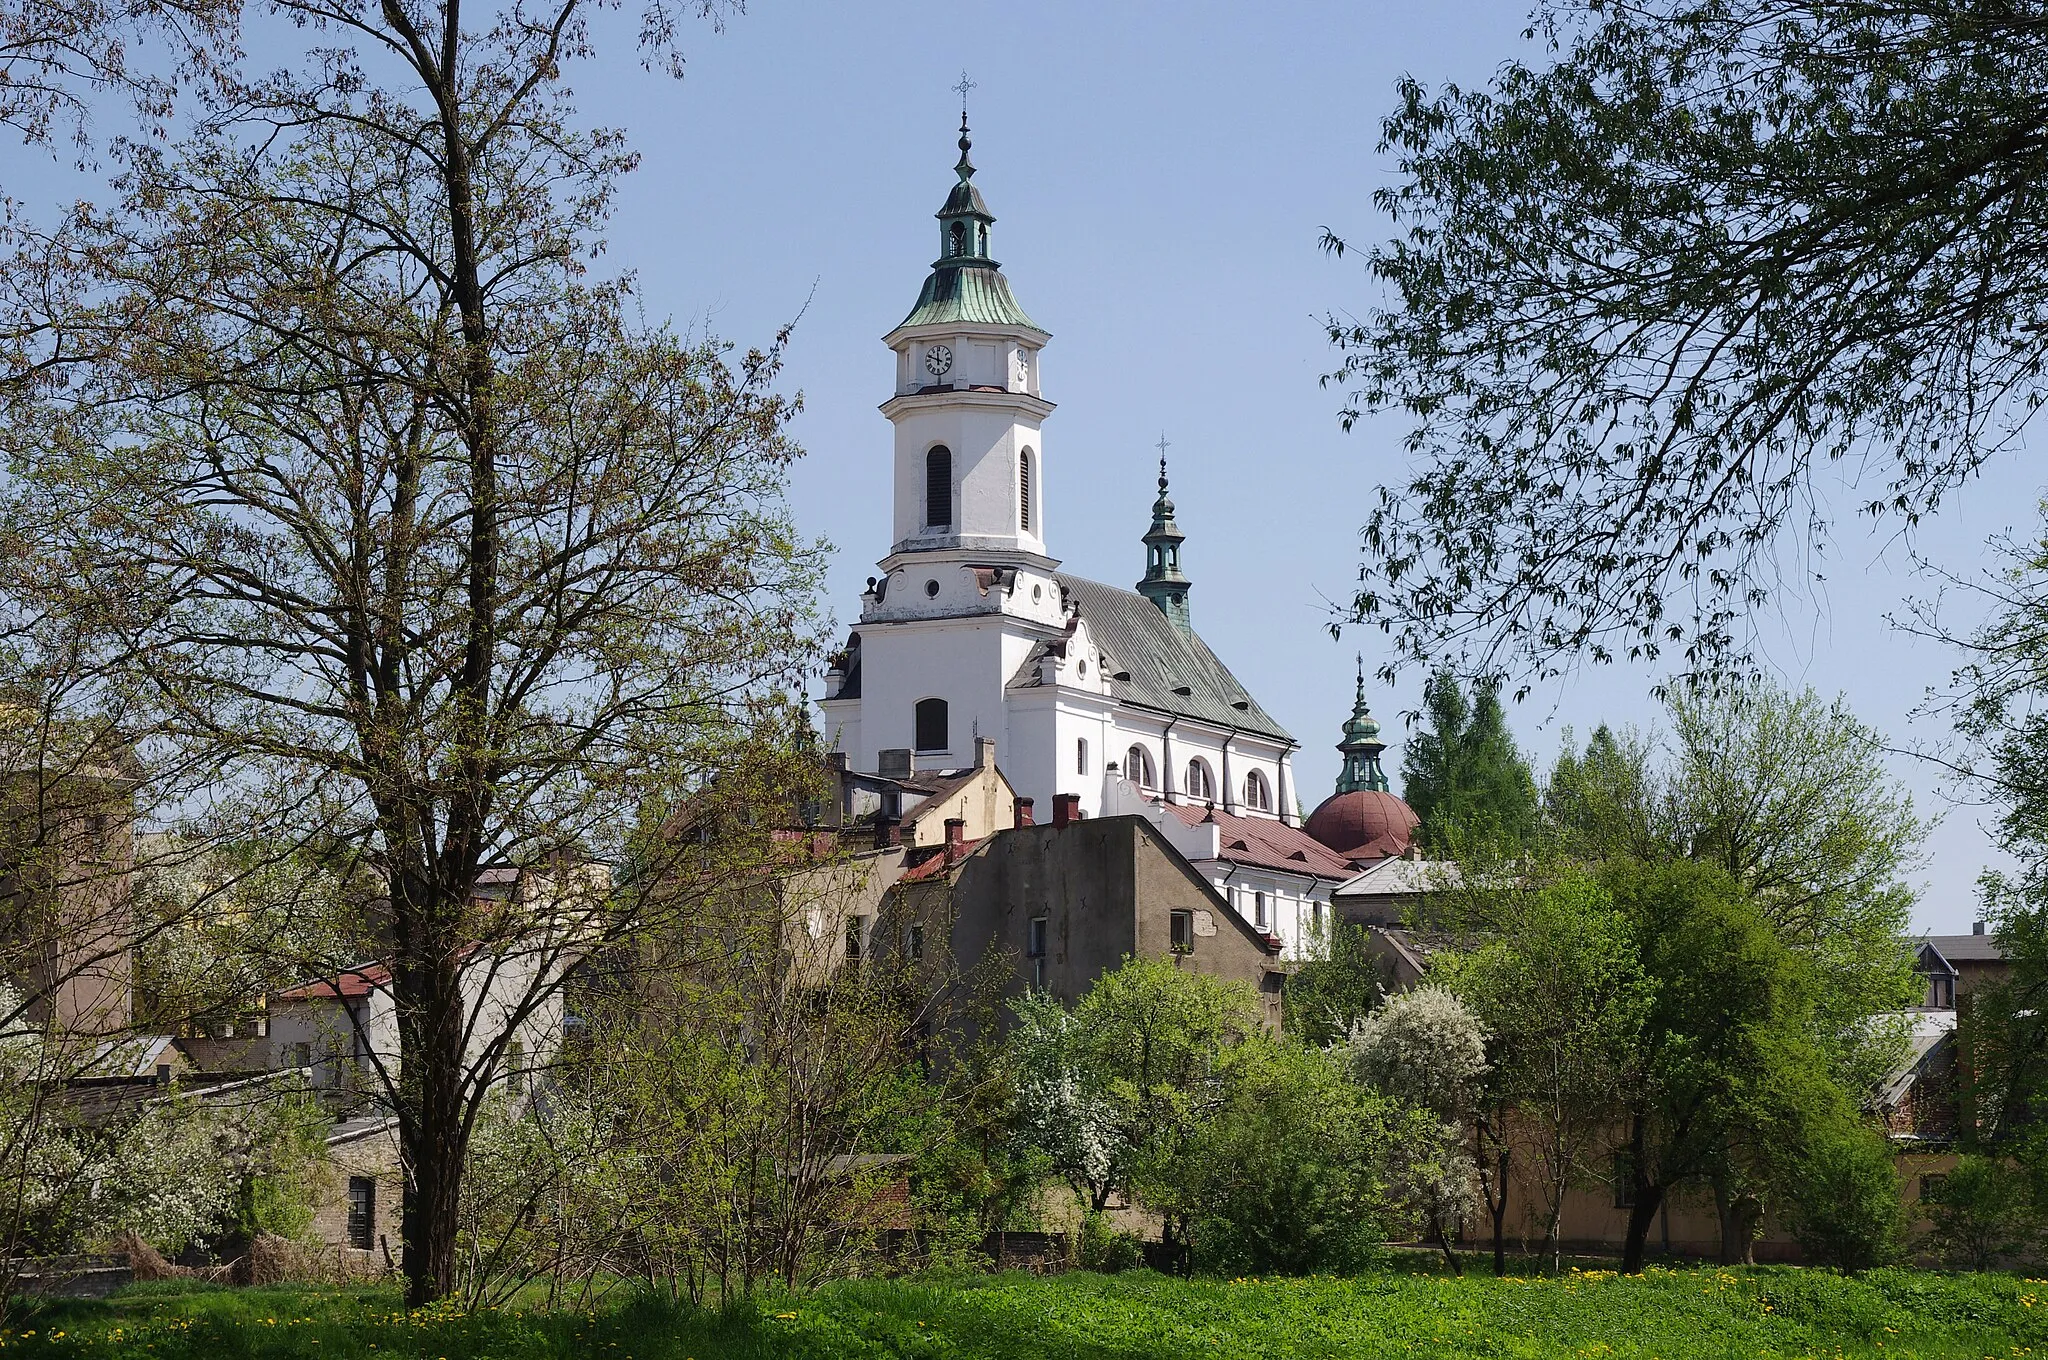 Photo showing: Collegiate of St. Michael and the town center of Ostrowiec Świętokrzyski, seen from the Town Park